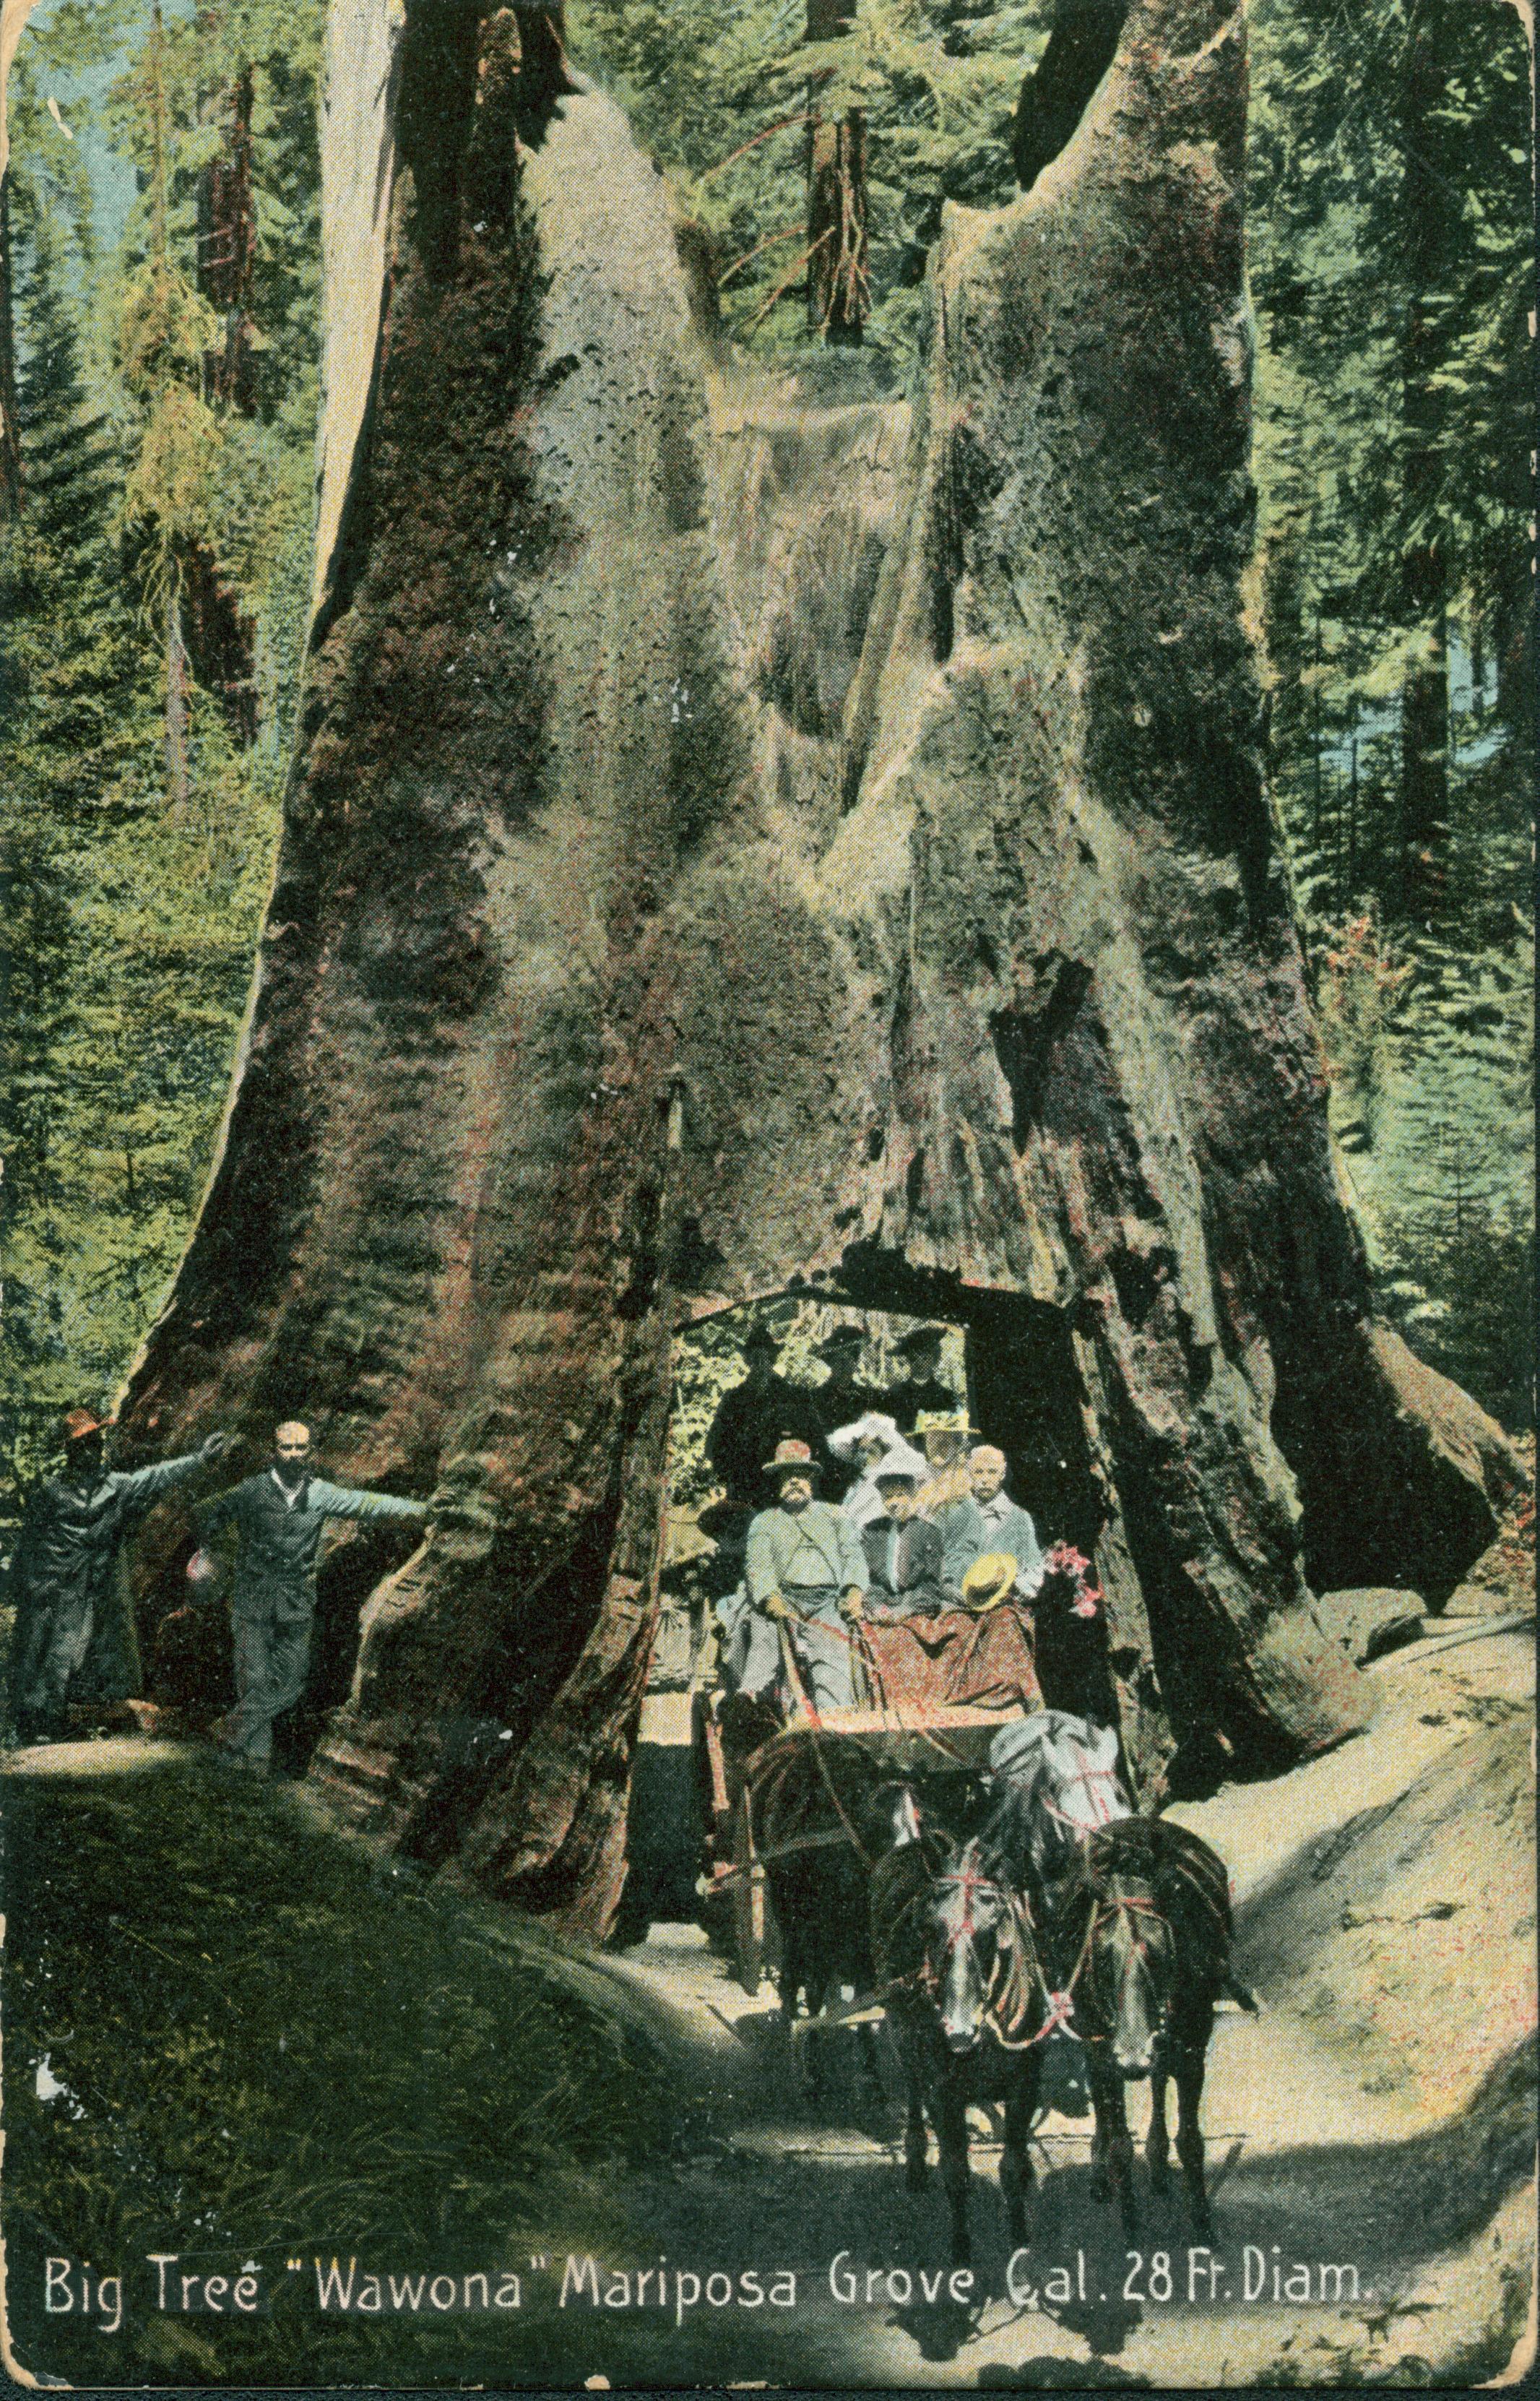 Shows a coach loaded with people driving through the Wawona tree